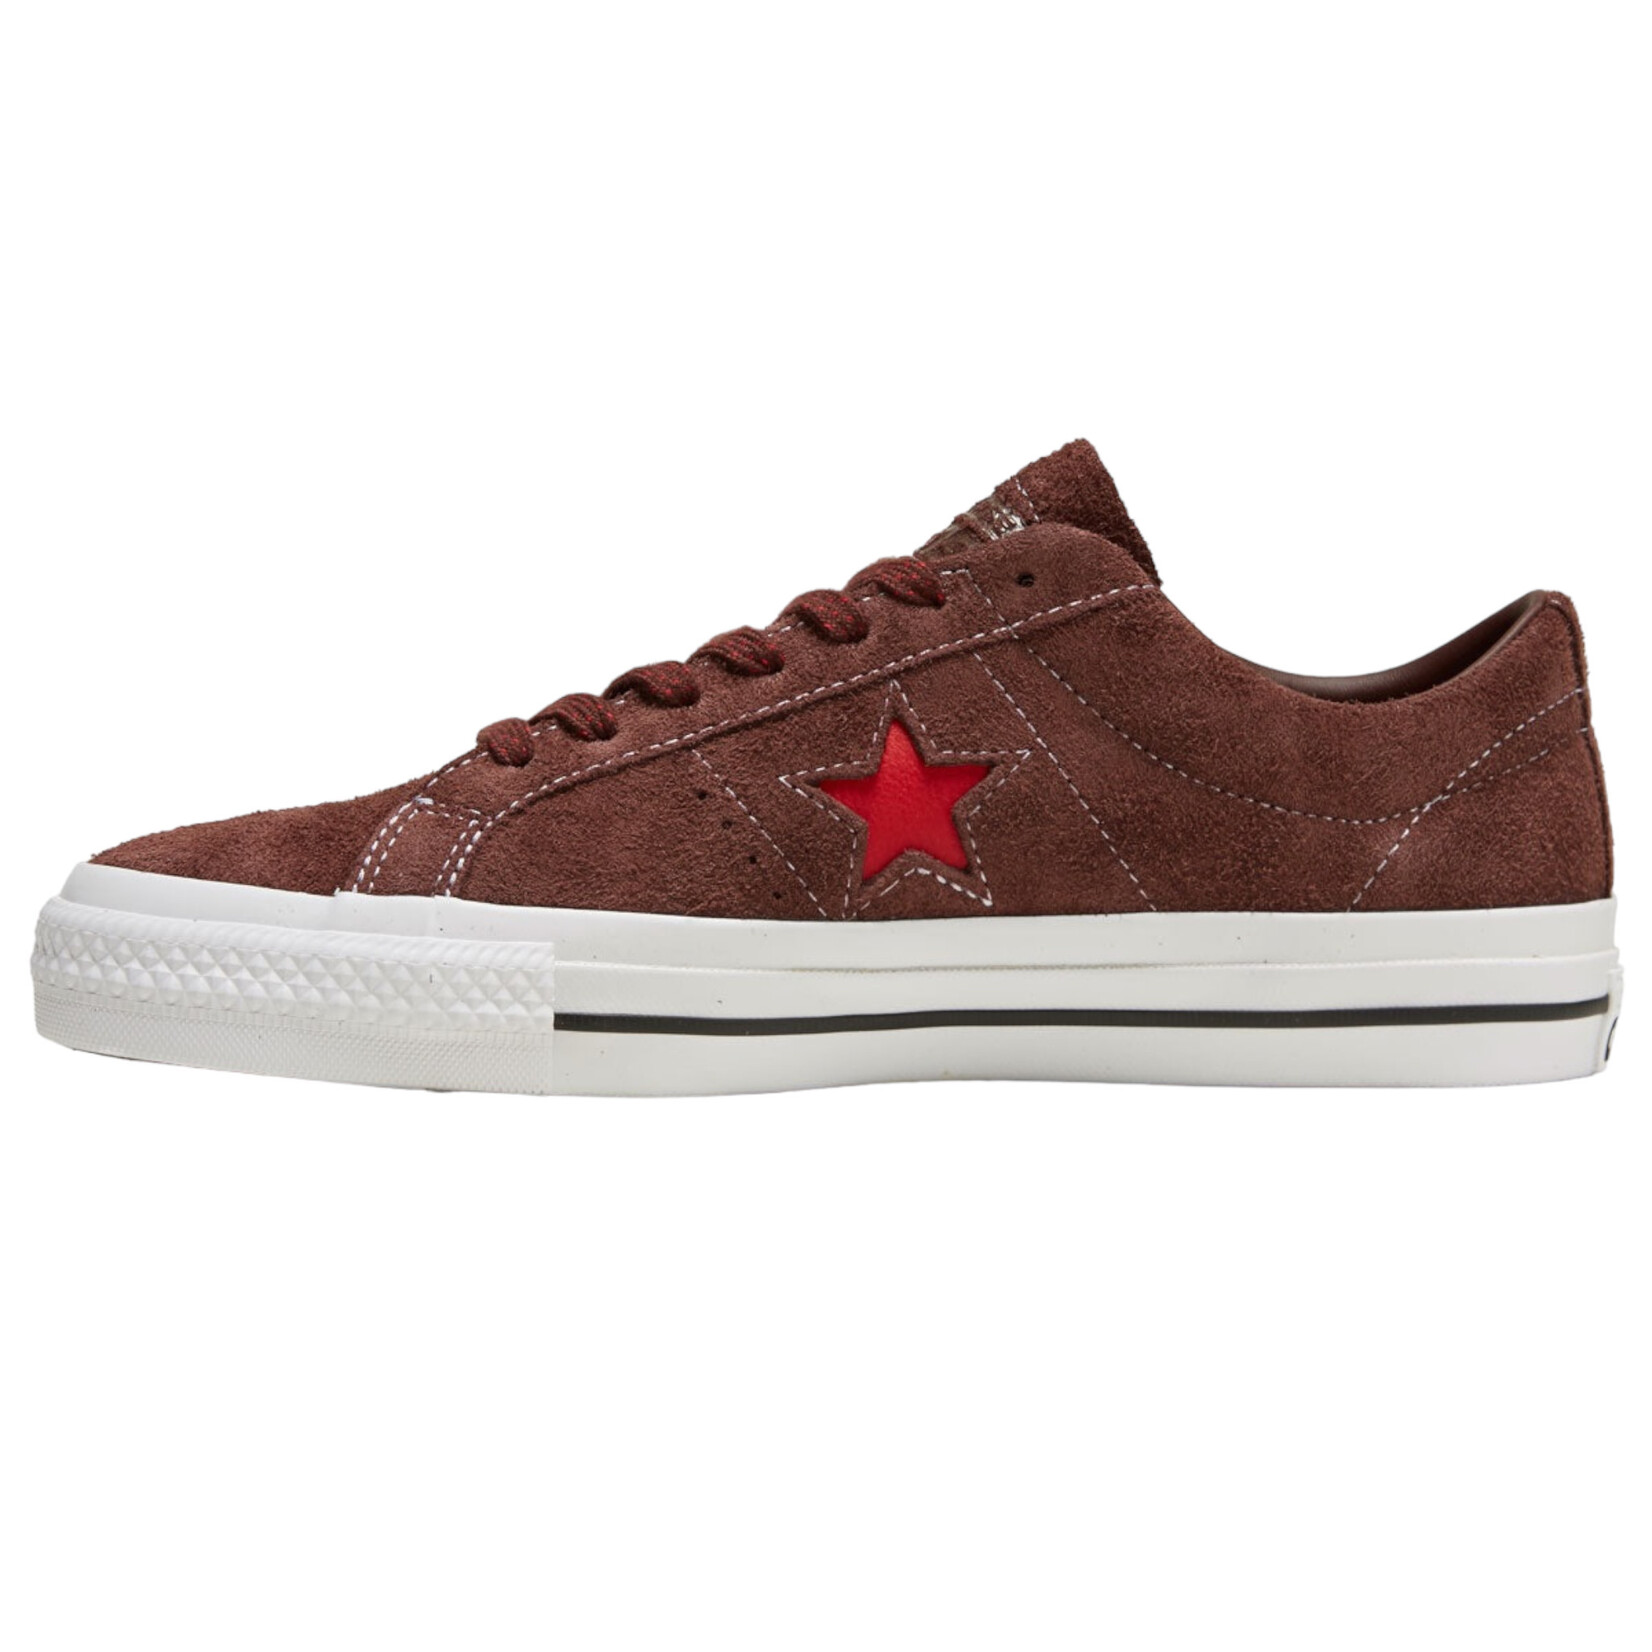 Converse Cons Converse CONS One Star Pro Eternal Earth/White/Red